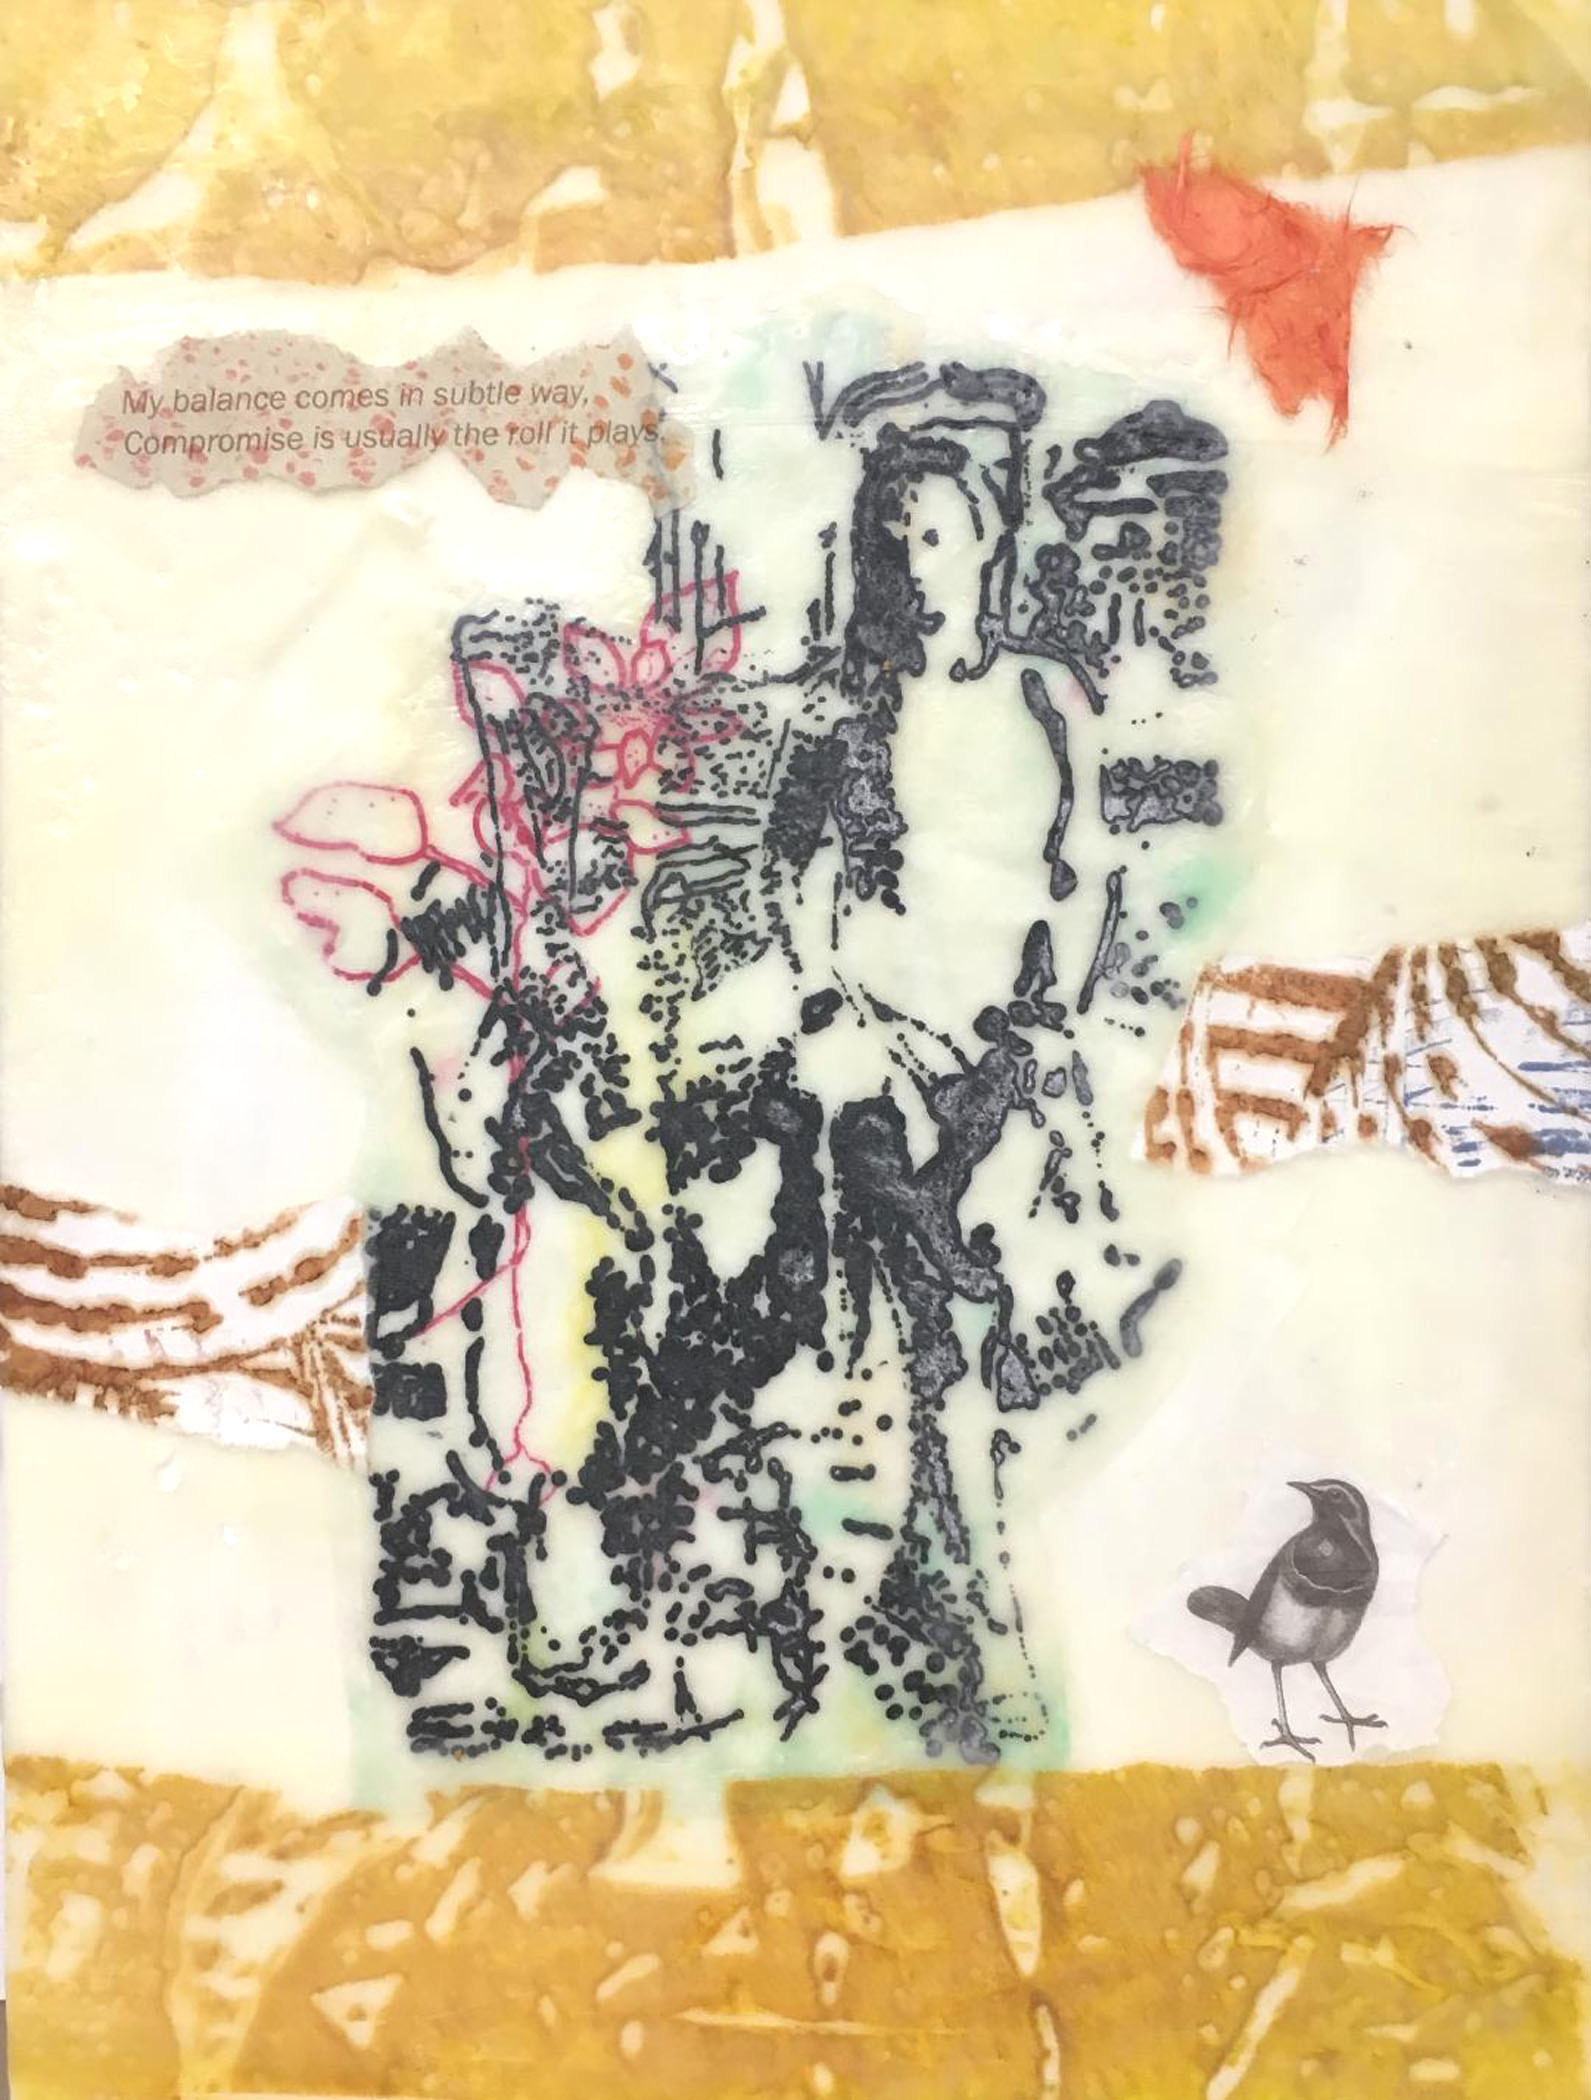 Bonnie Randall Boller "Searching for Meaning" printmaking & encaustic mixed media 16" x 12" 2019